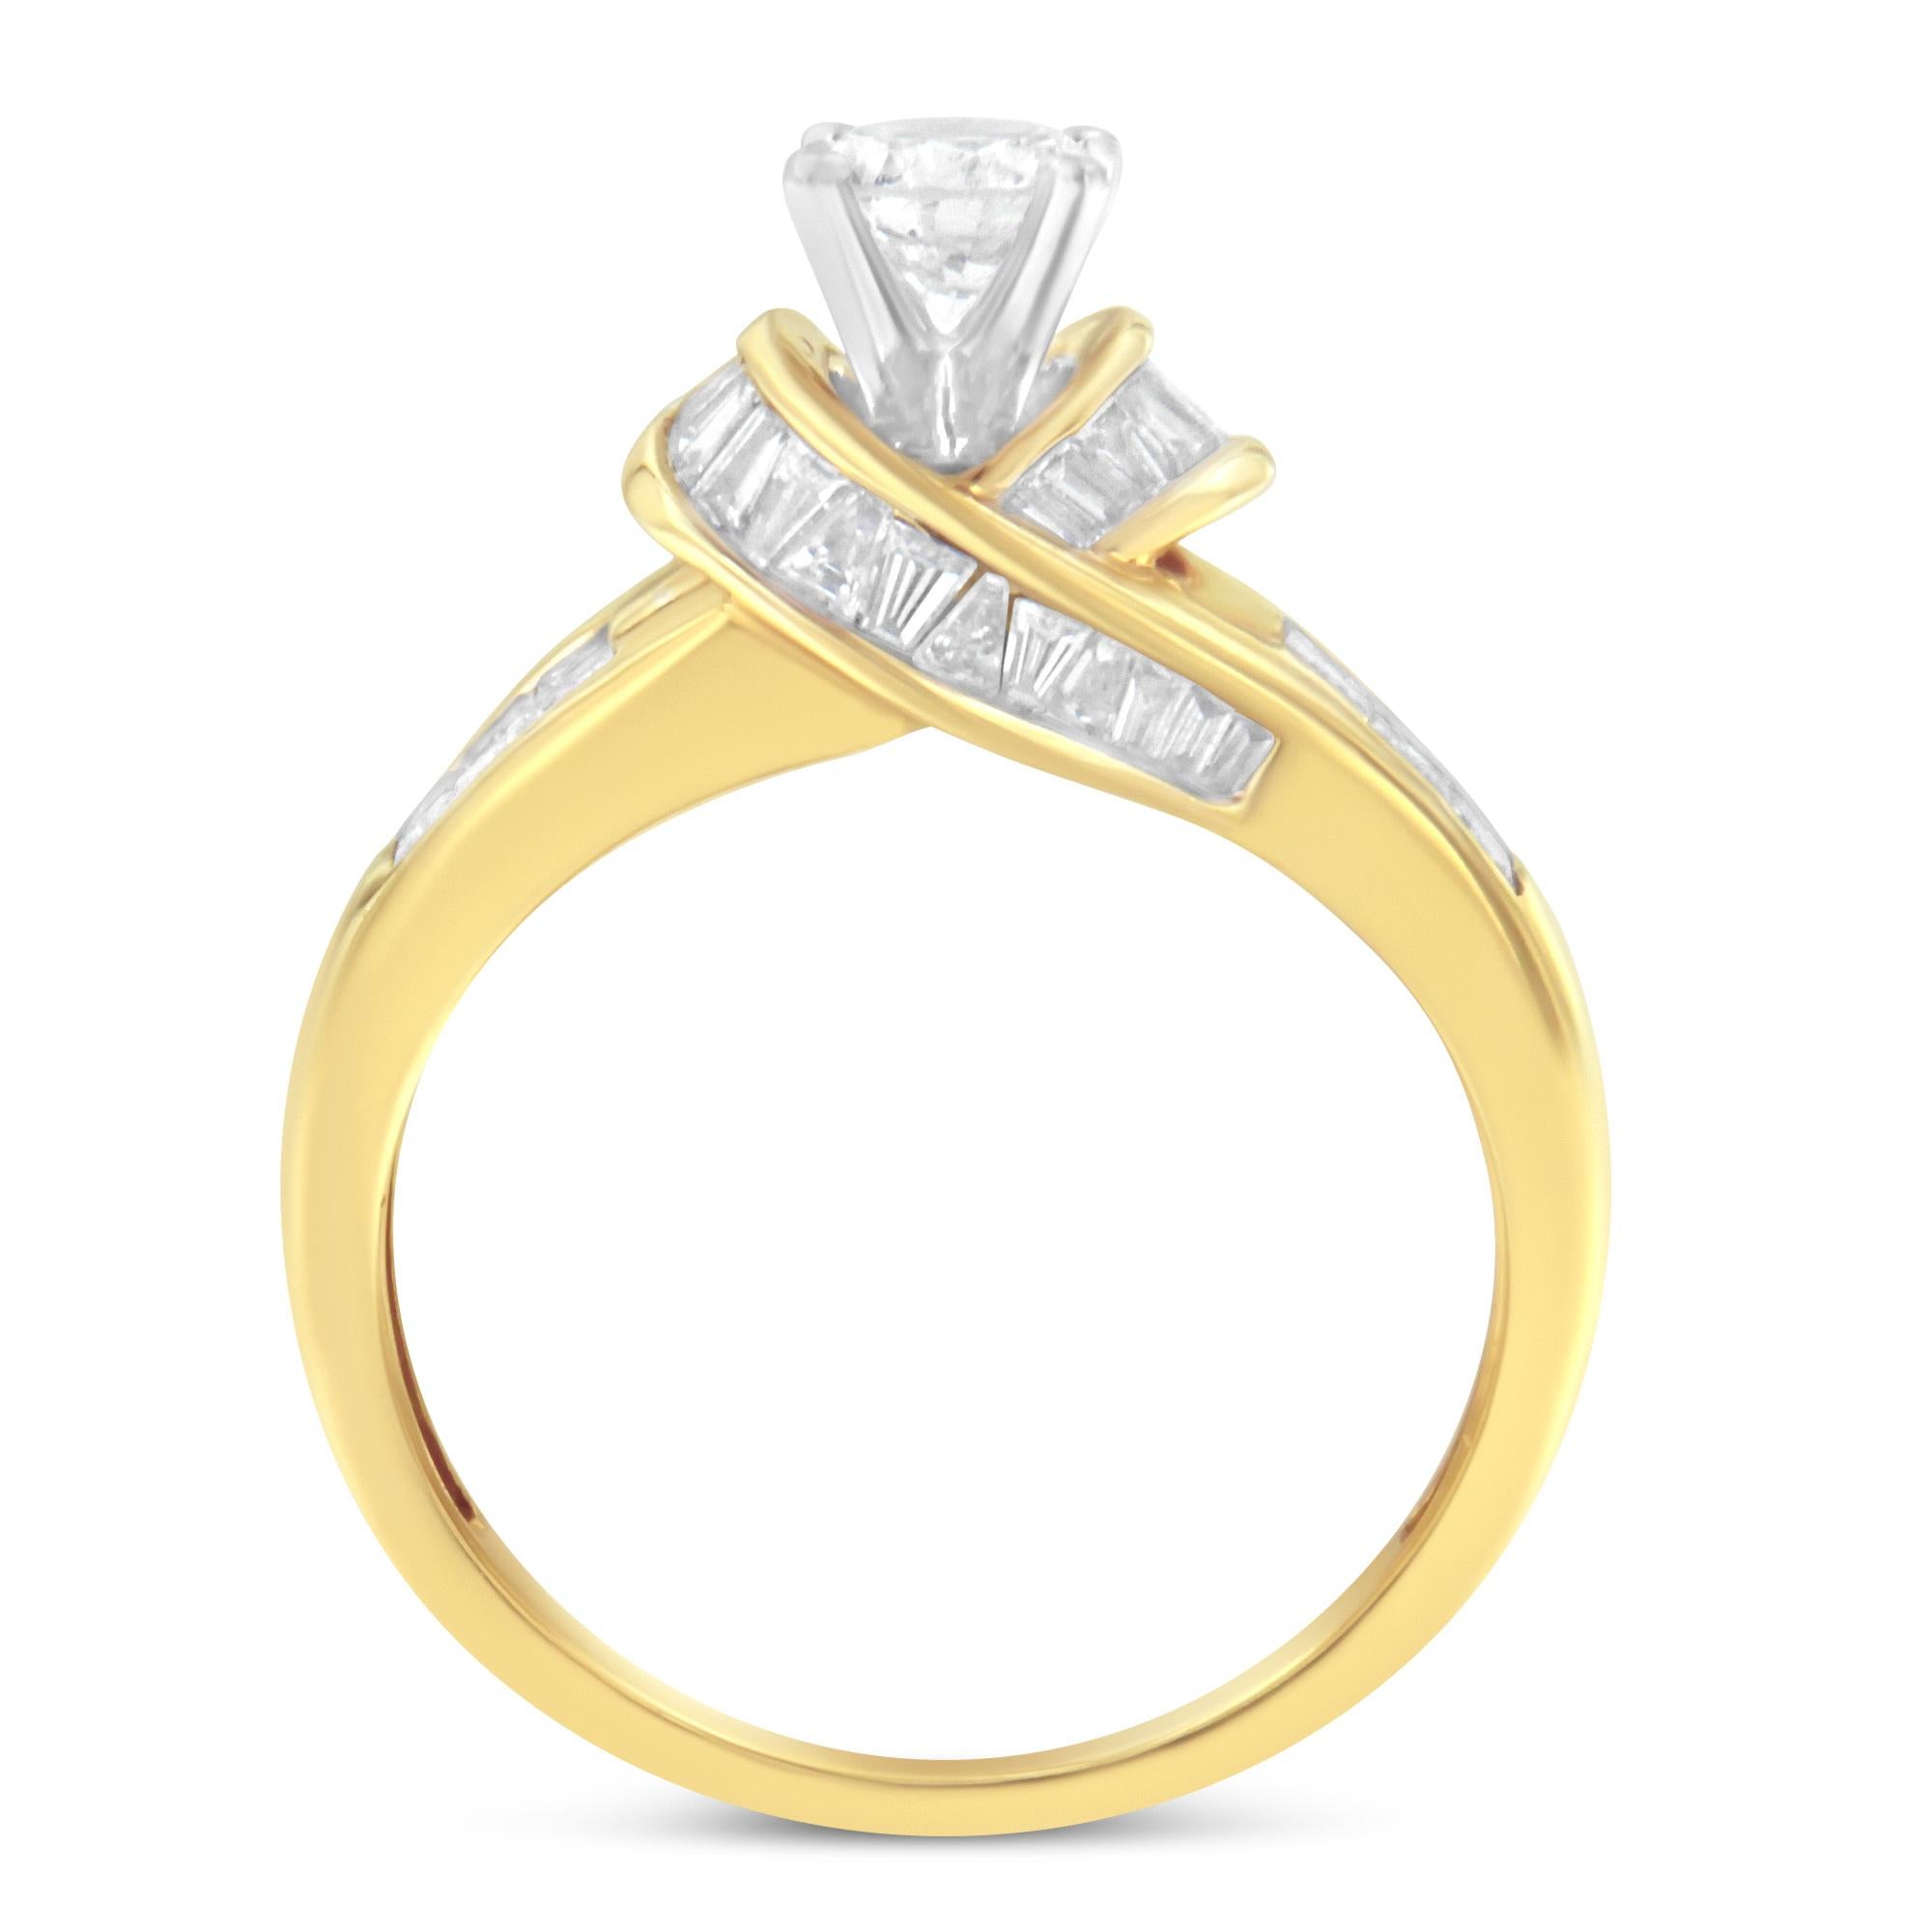 For Sale:  14K Two-Toned Gold 1 1/8 Carat Diamond Cocktail Ring 2